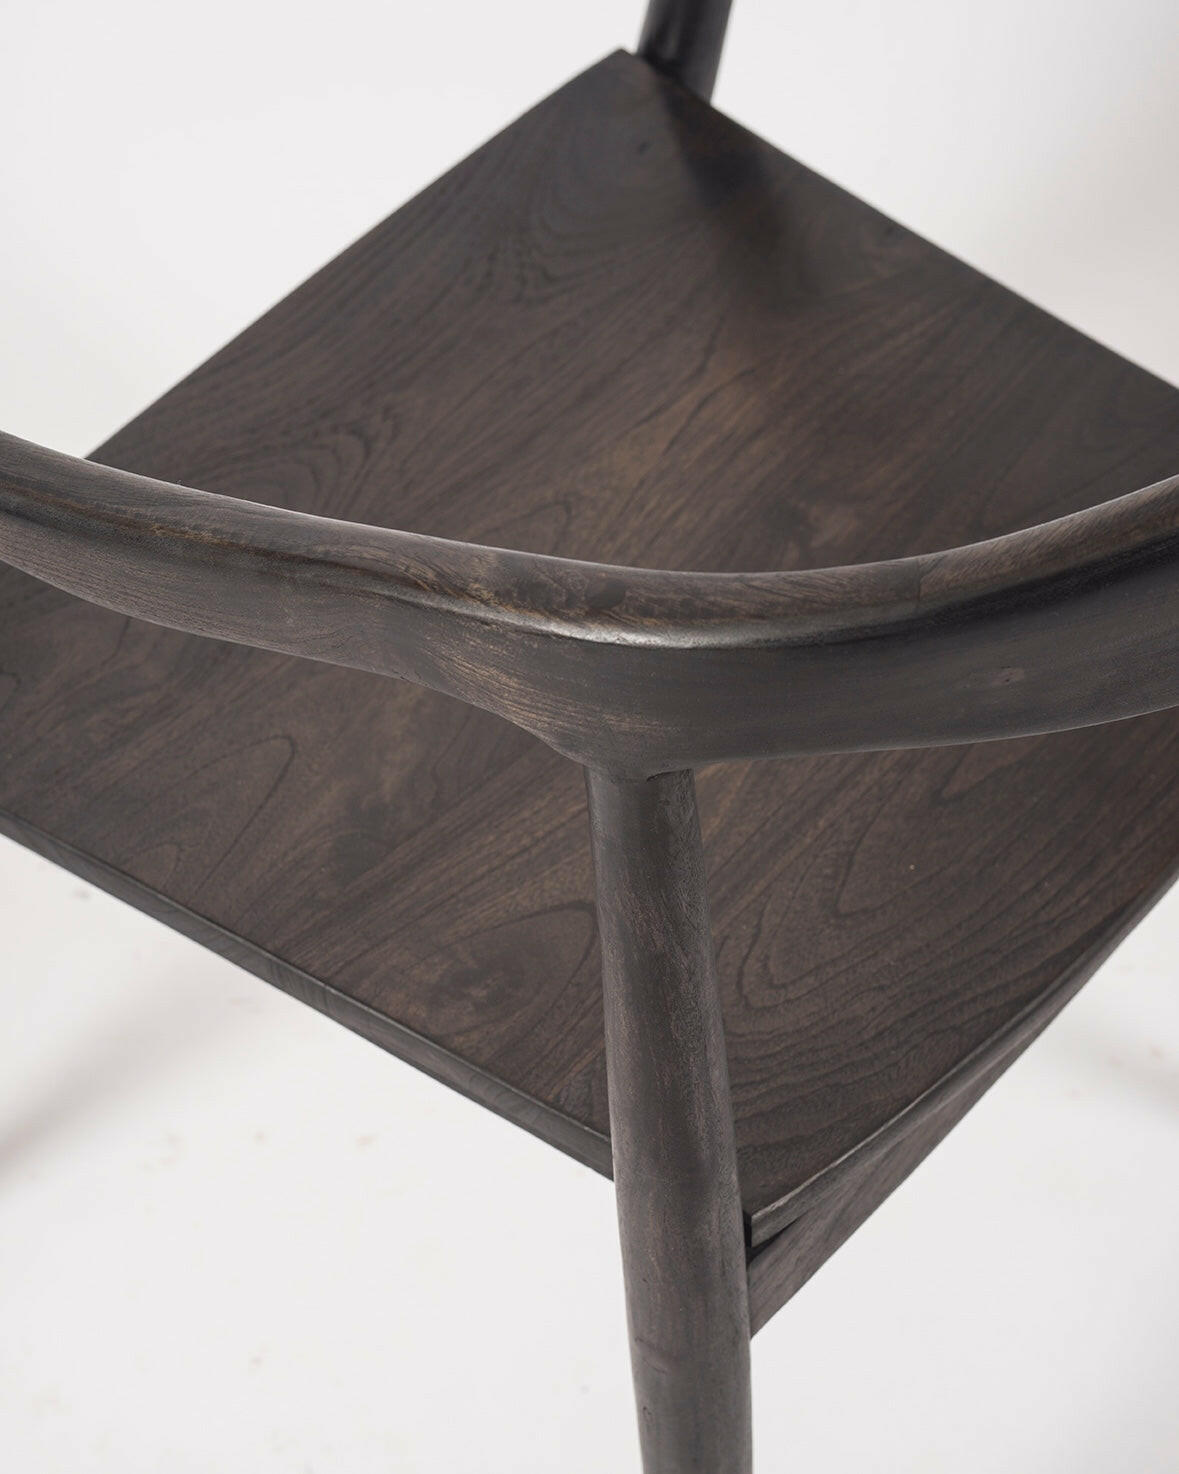 Tokyo Carbon chair in recycled teak